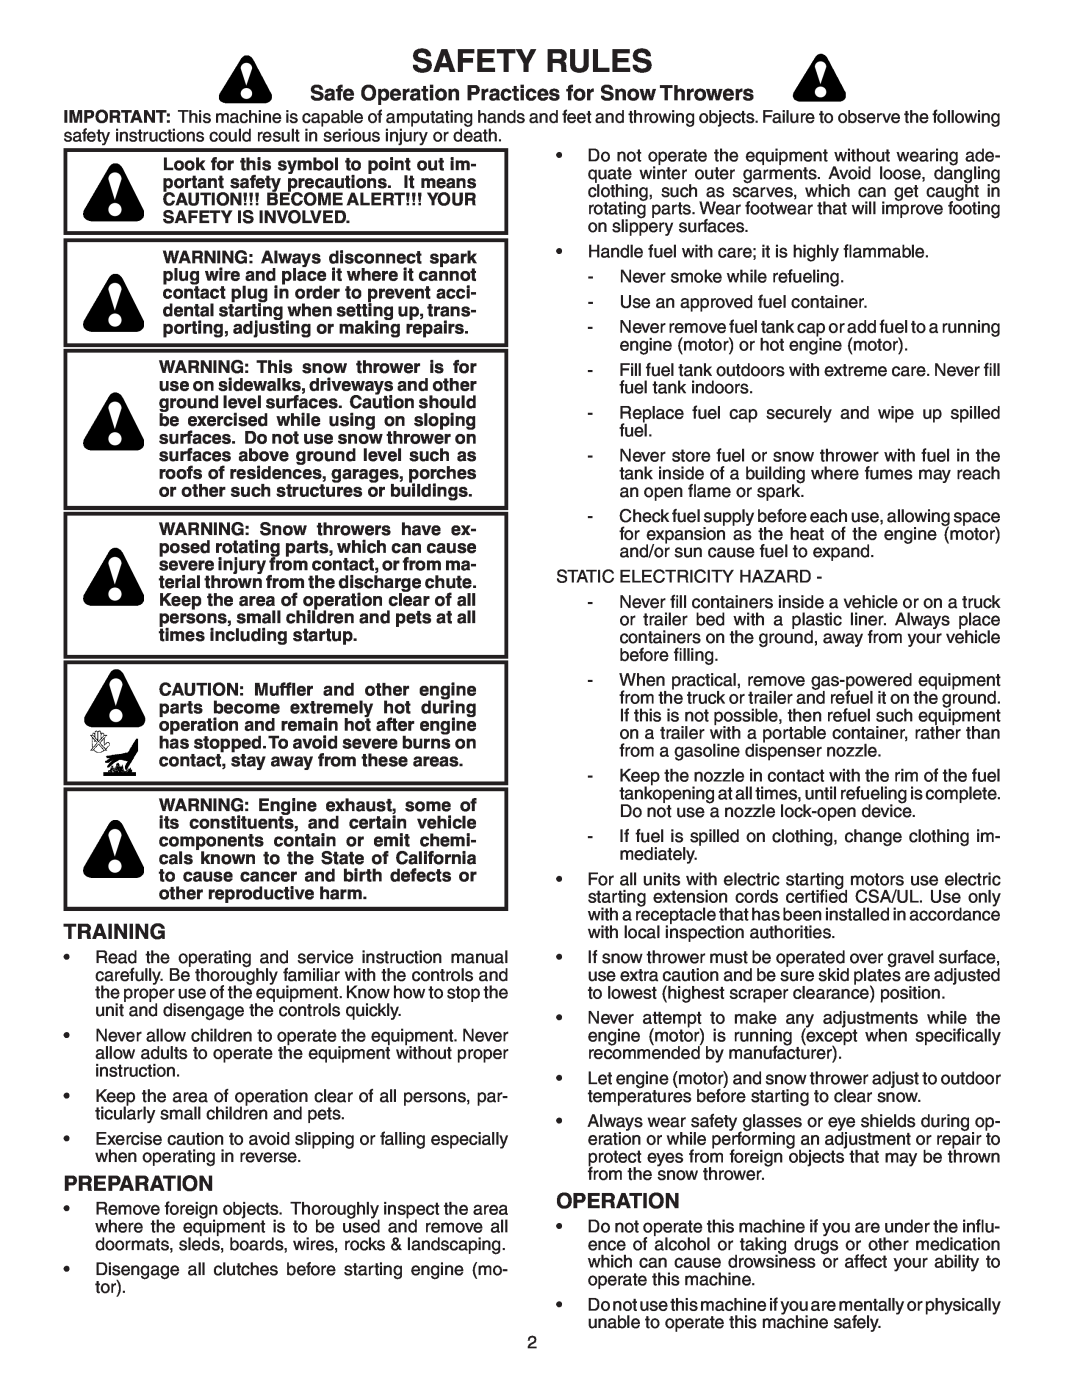 Poulan PP8527ESB owner manual Safety Rules, Safe Operation Practices for Snow Throwers, Training, Preparation 